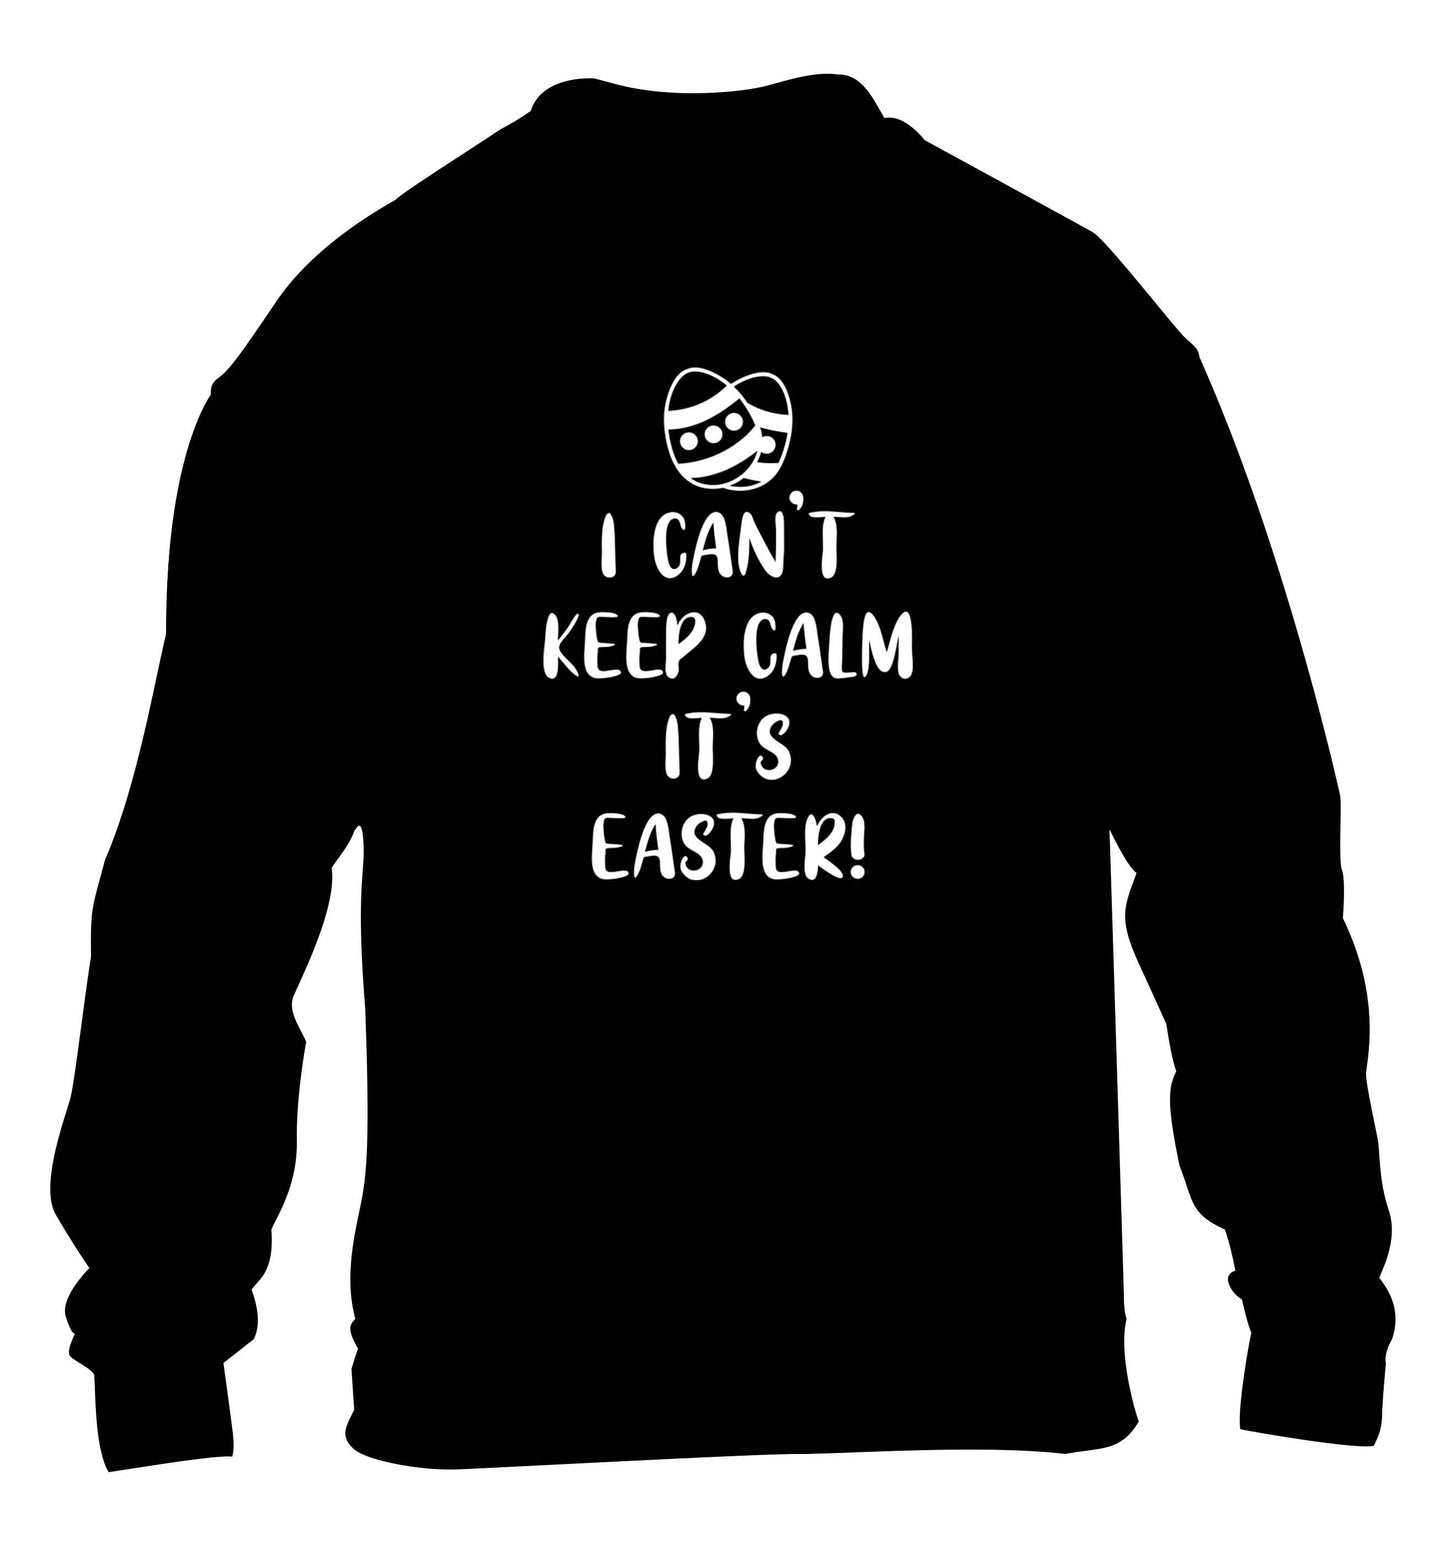 I can't keep calm it's Easter children's black sweater 12-13 Years